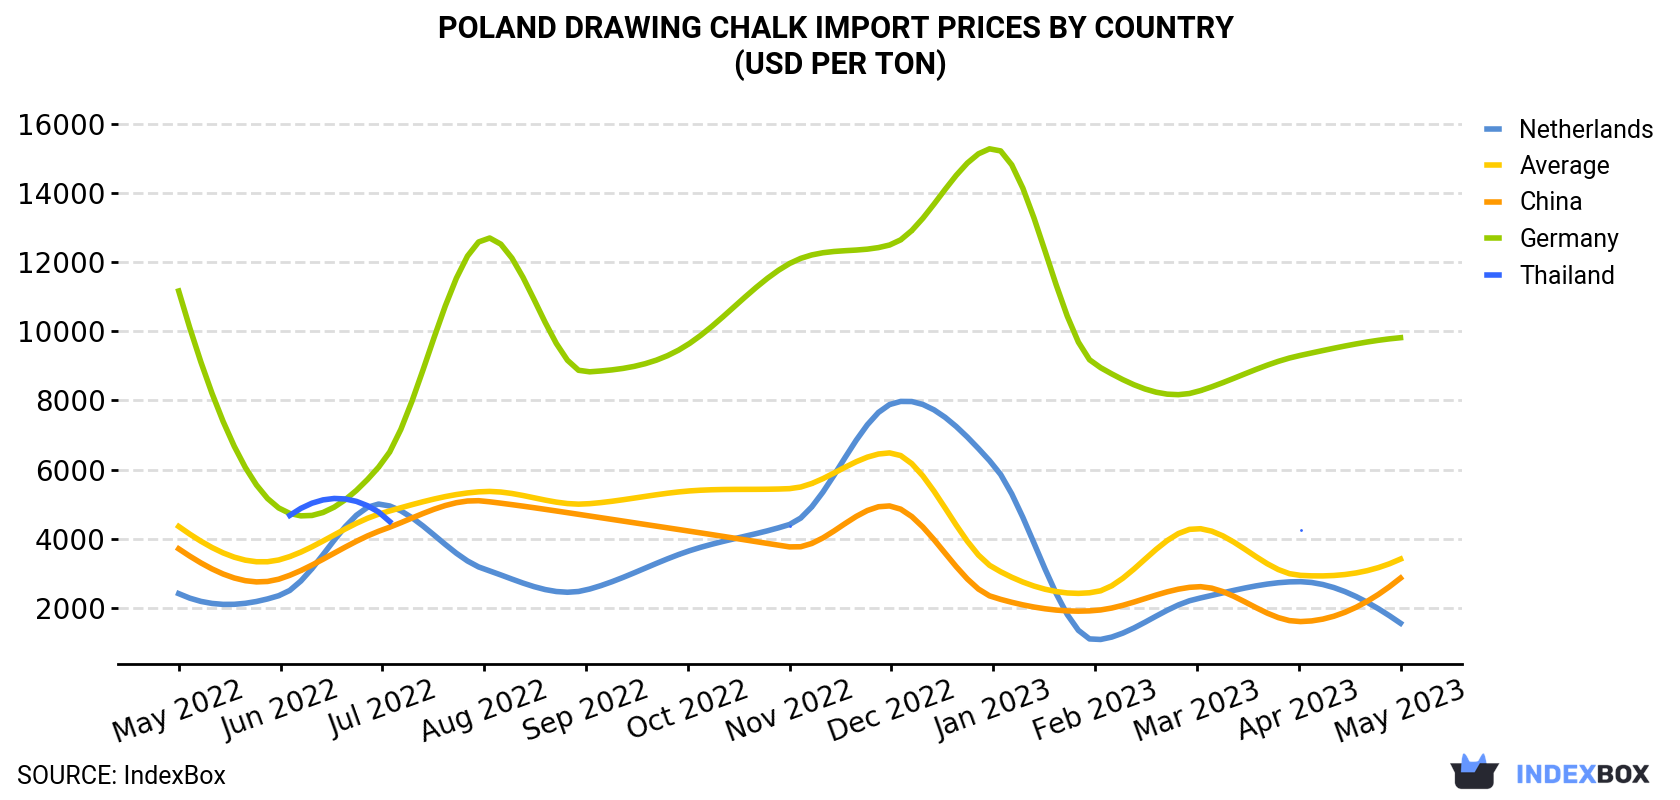 Poland Drawing Chalk Import Prices By Country (USD Per Ton)